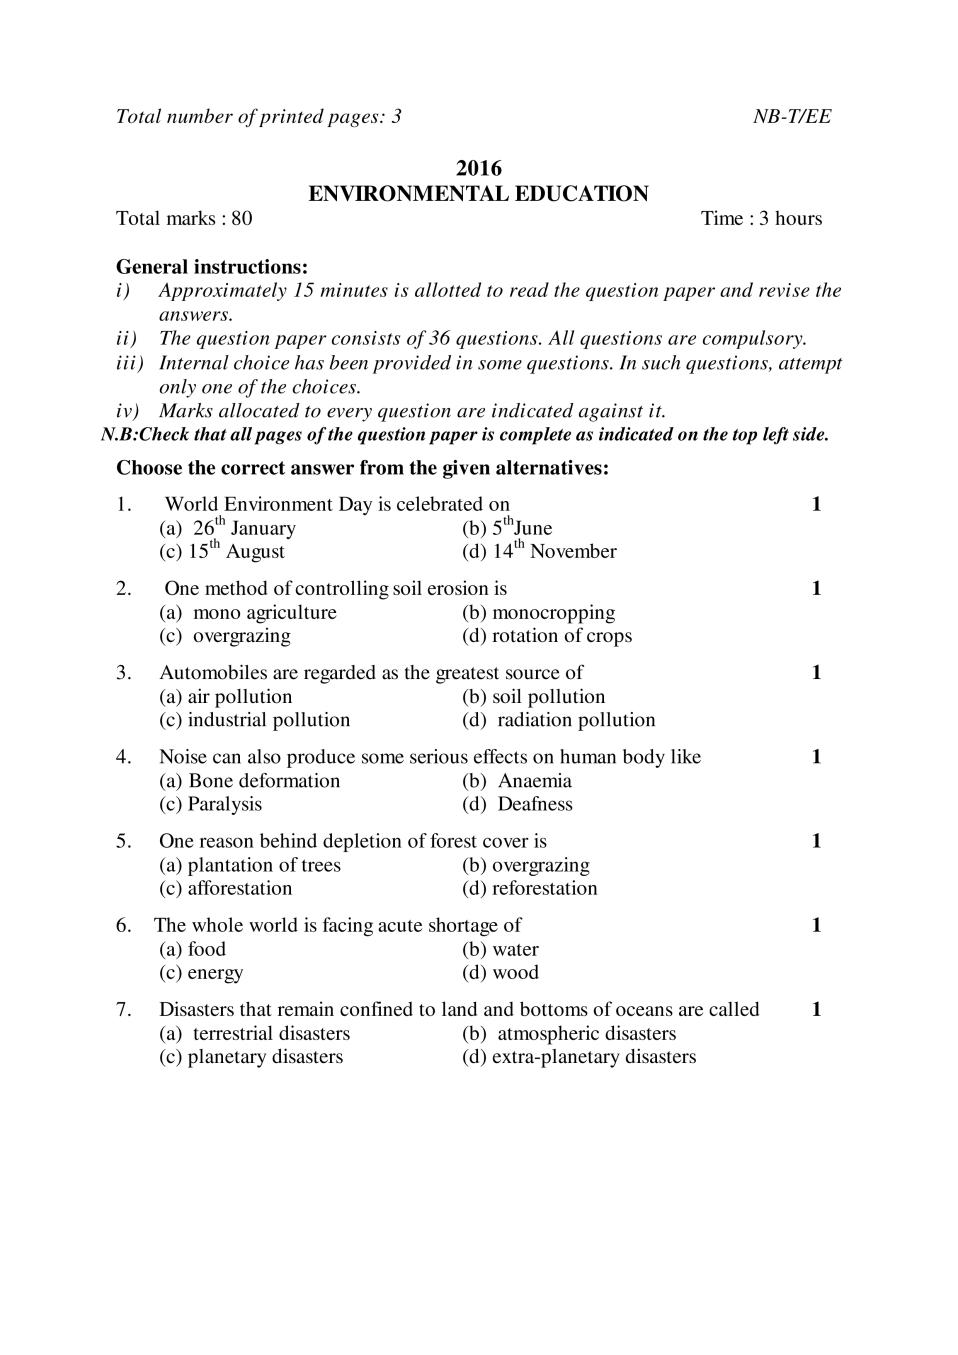 NBSE Class 10 Question Paper 2016 for EnvironmentEducation - Page 1